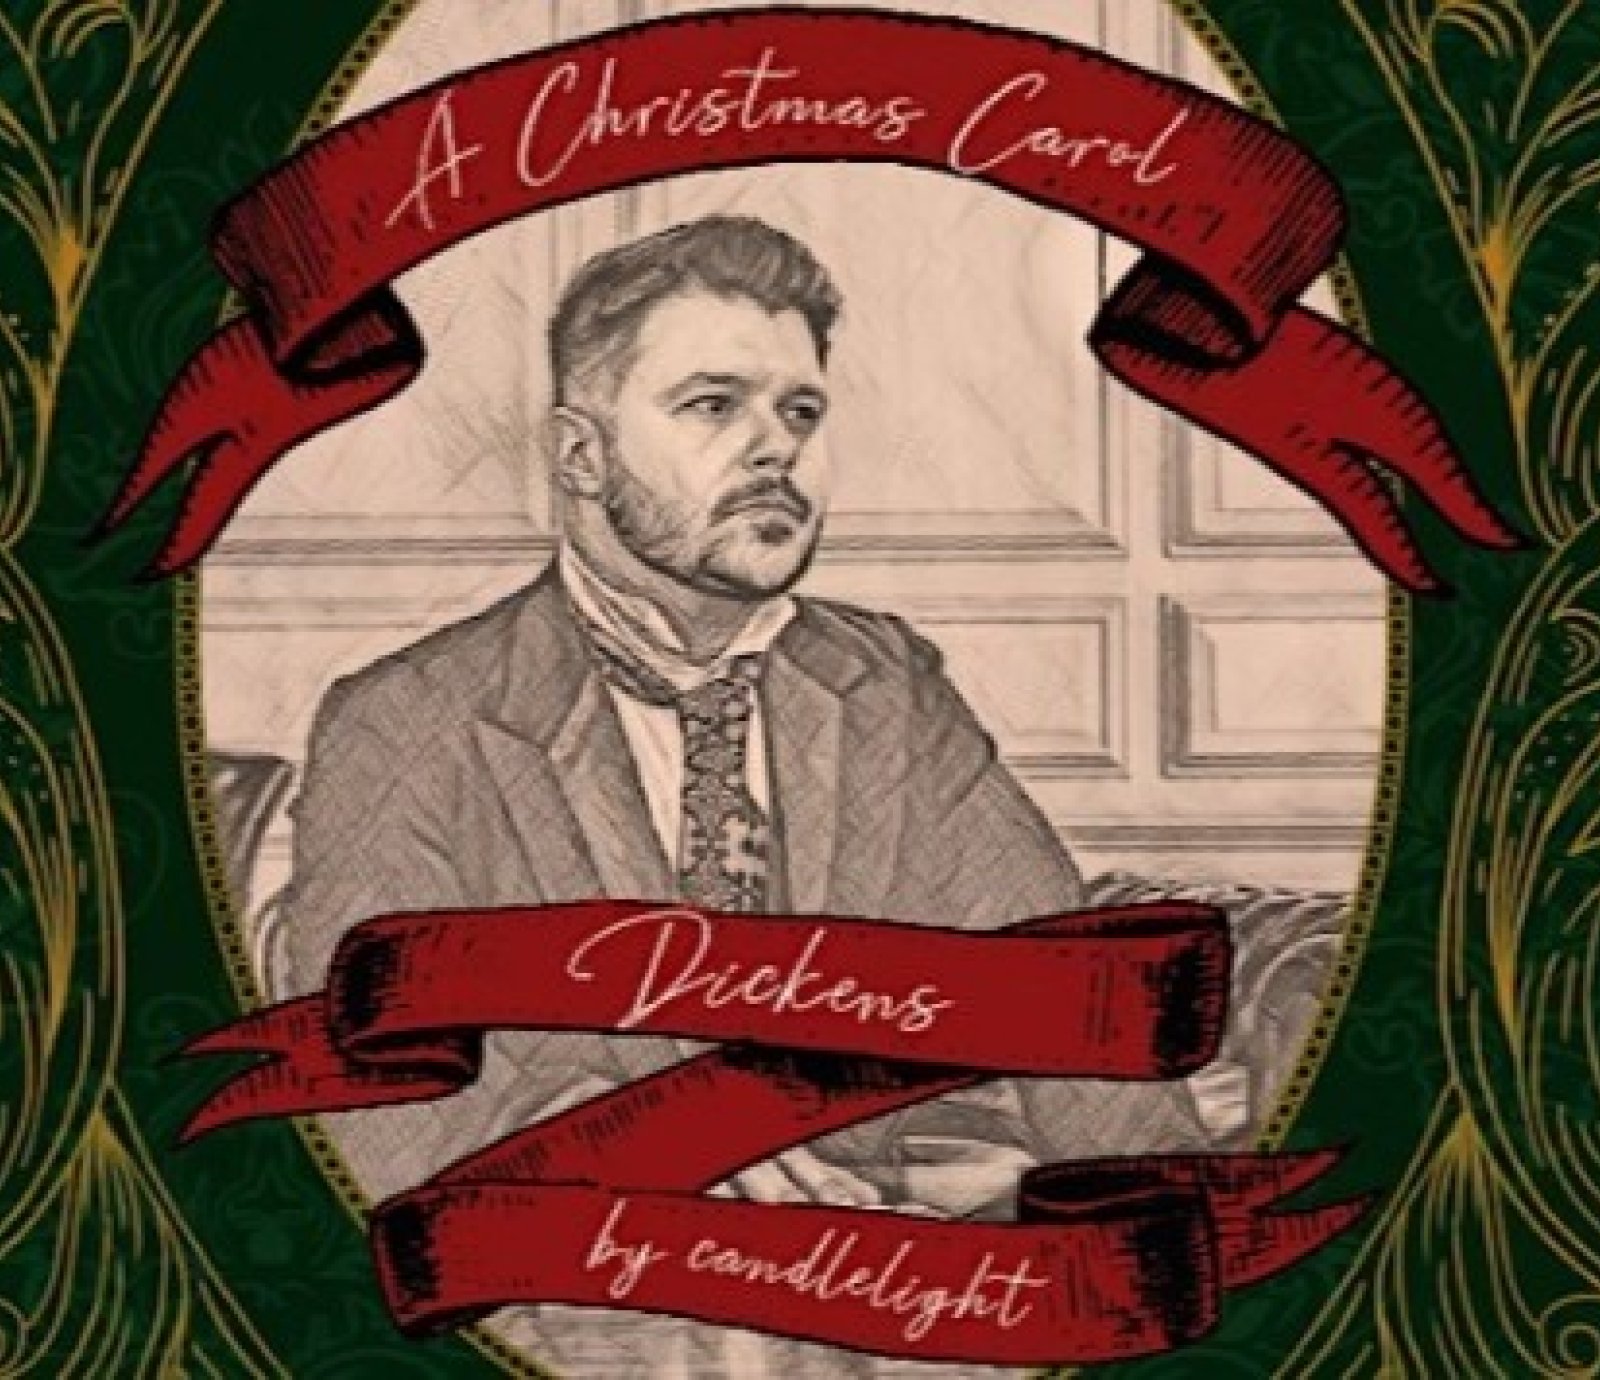 Dickens by Candlelight: A Christmas Carol